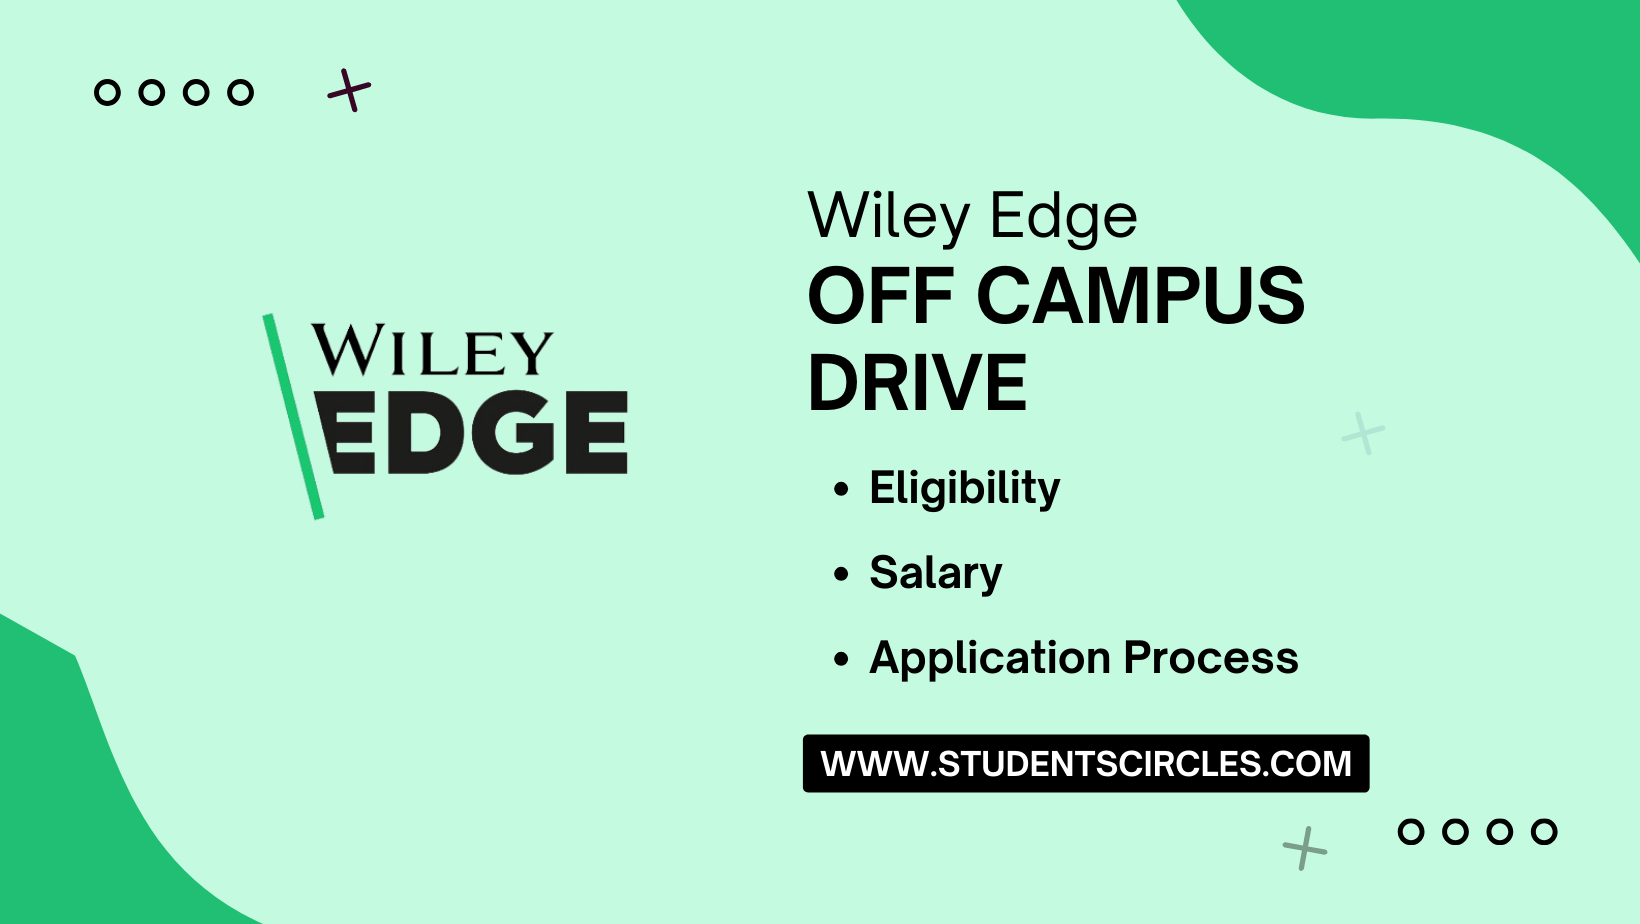 Wiley Edge Off Campus Drive